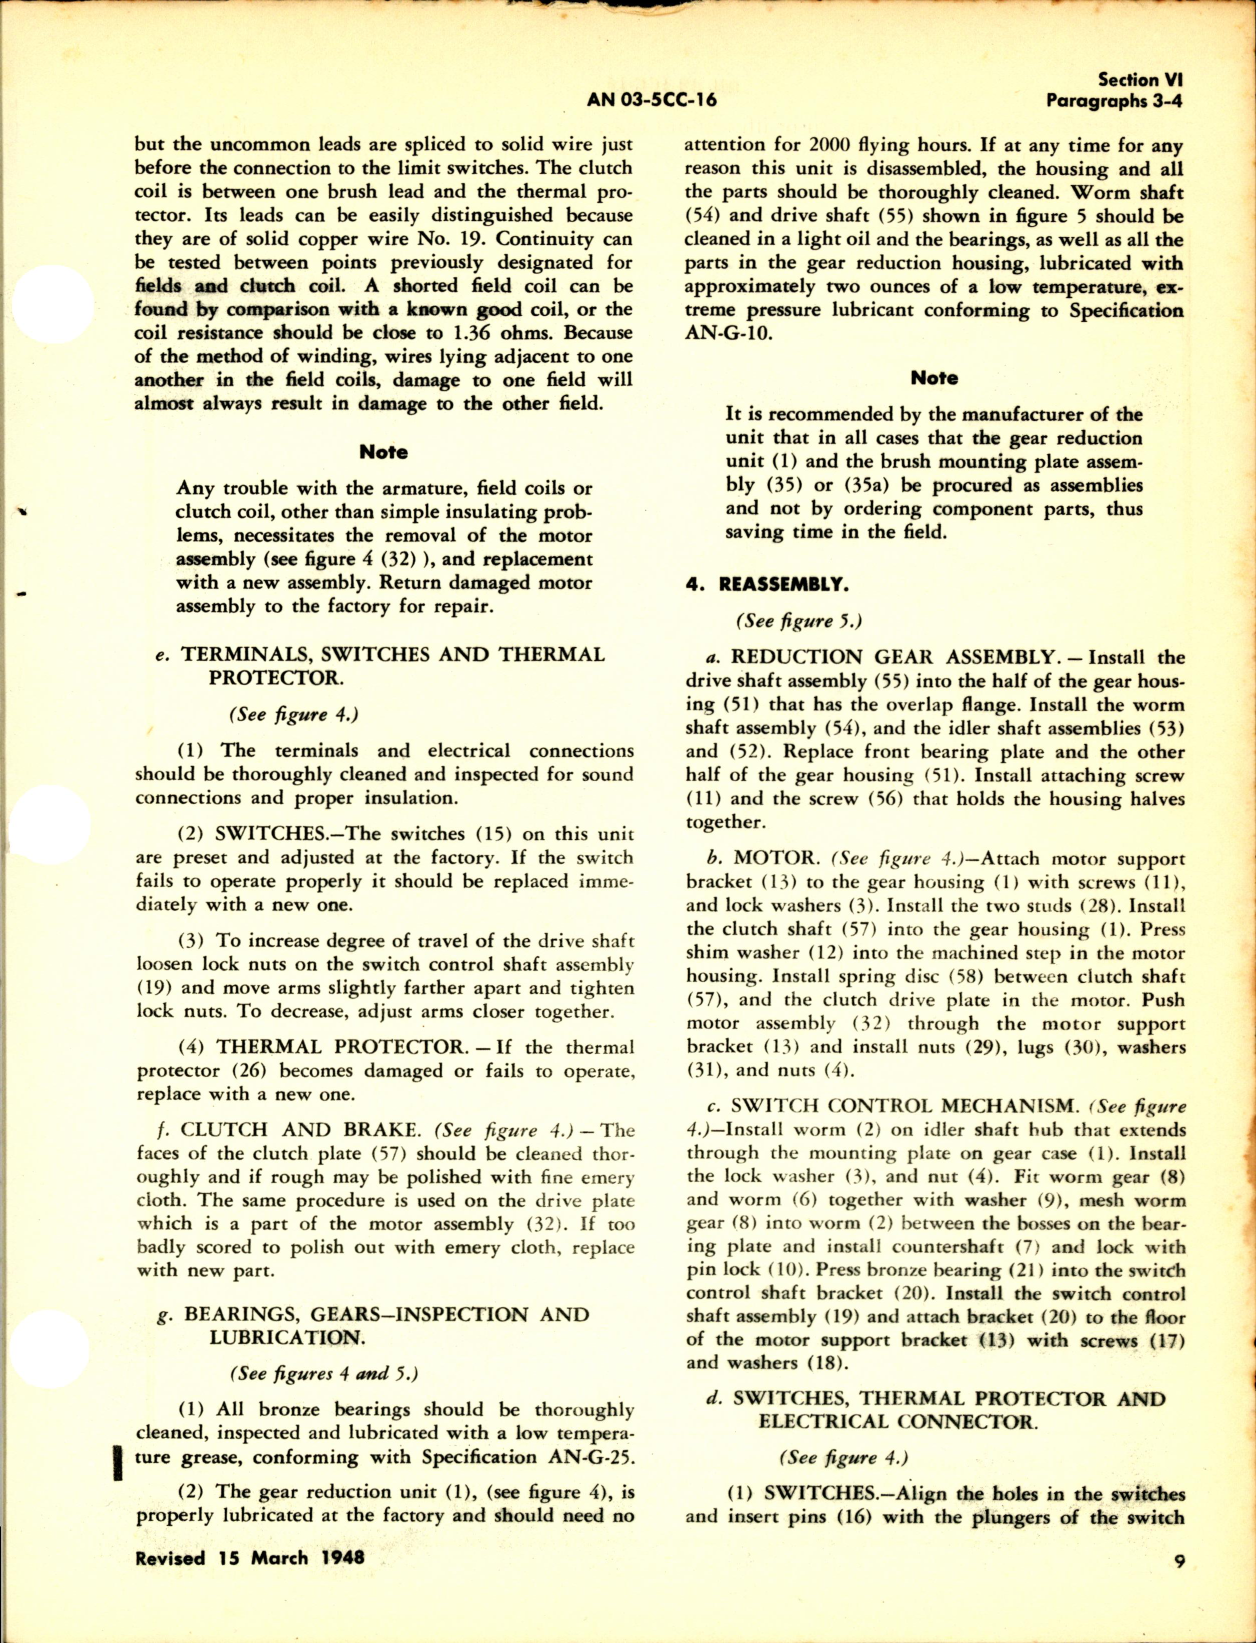 Sample page 3 from AirCorps Library document: Intercooler Shutter Control Drive FP-1